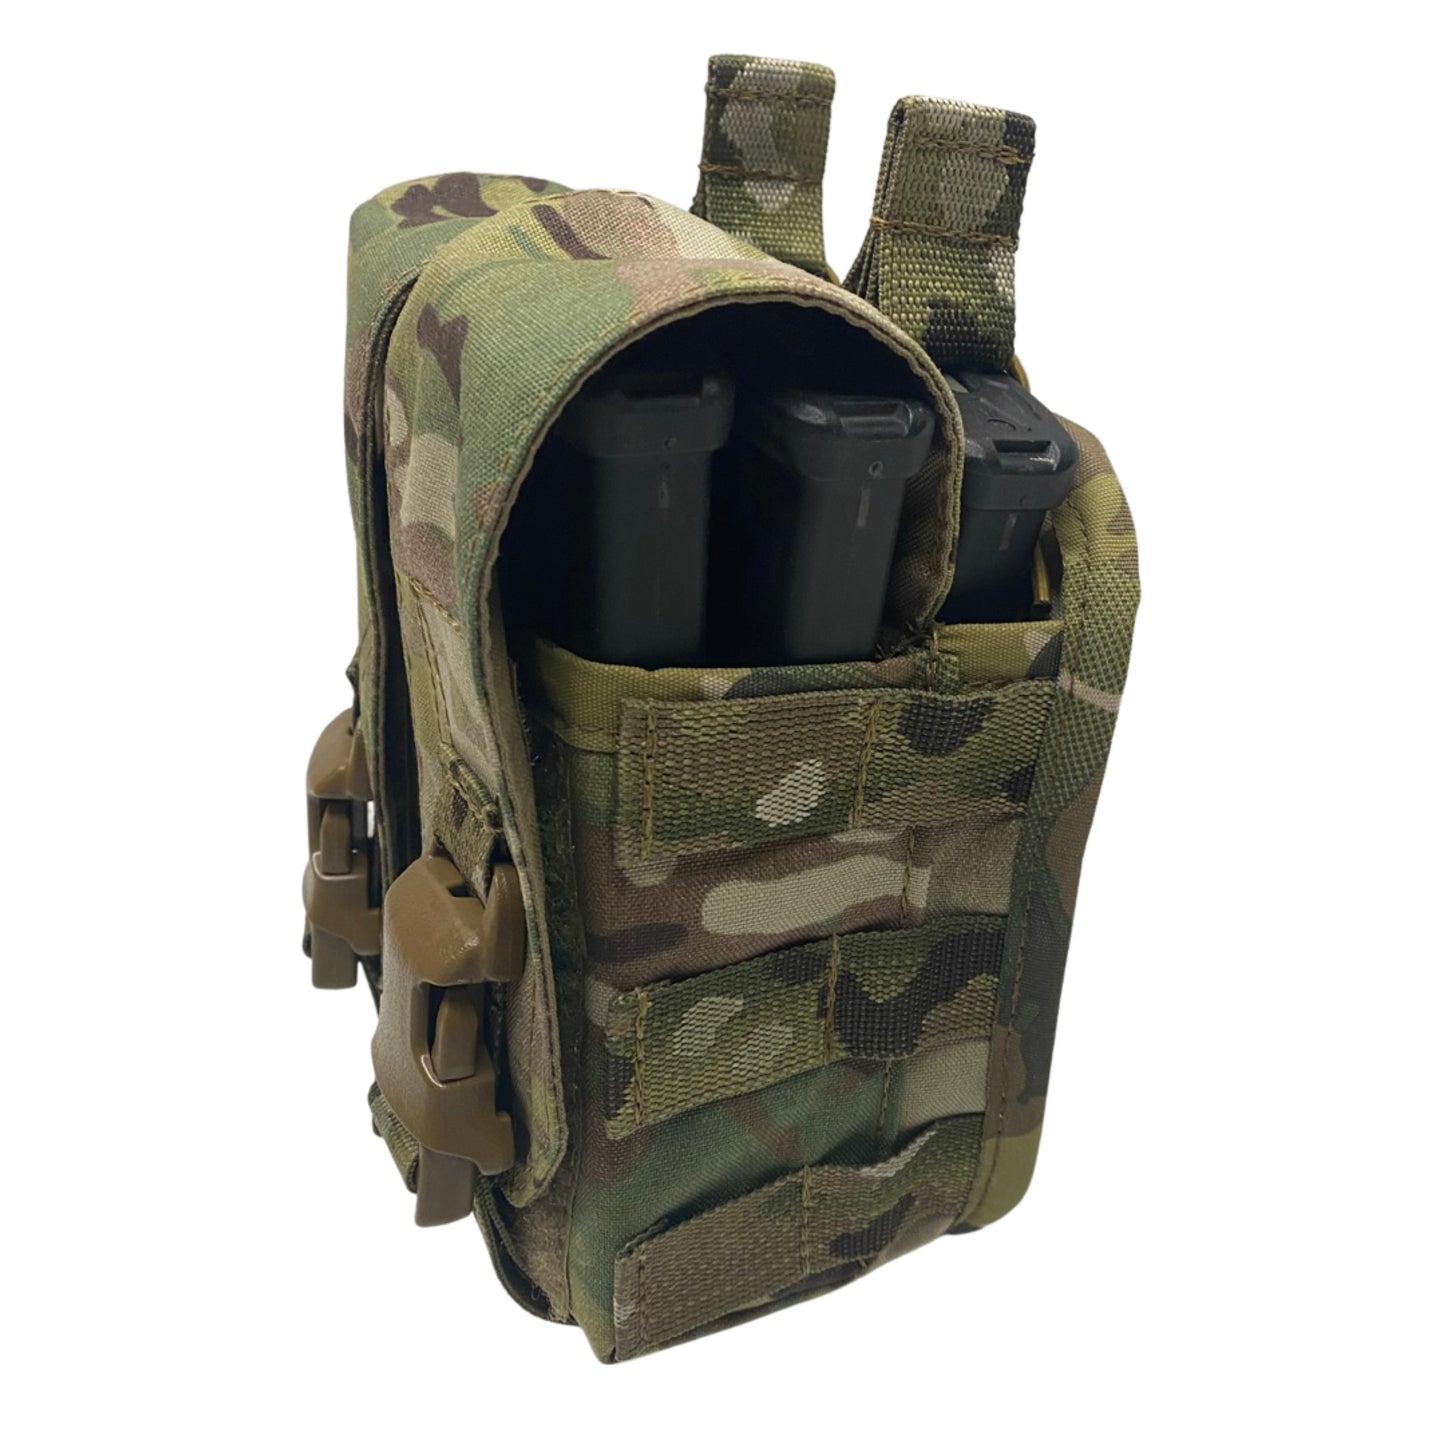 Double Ammo Pouch with quick access mags and Smoke